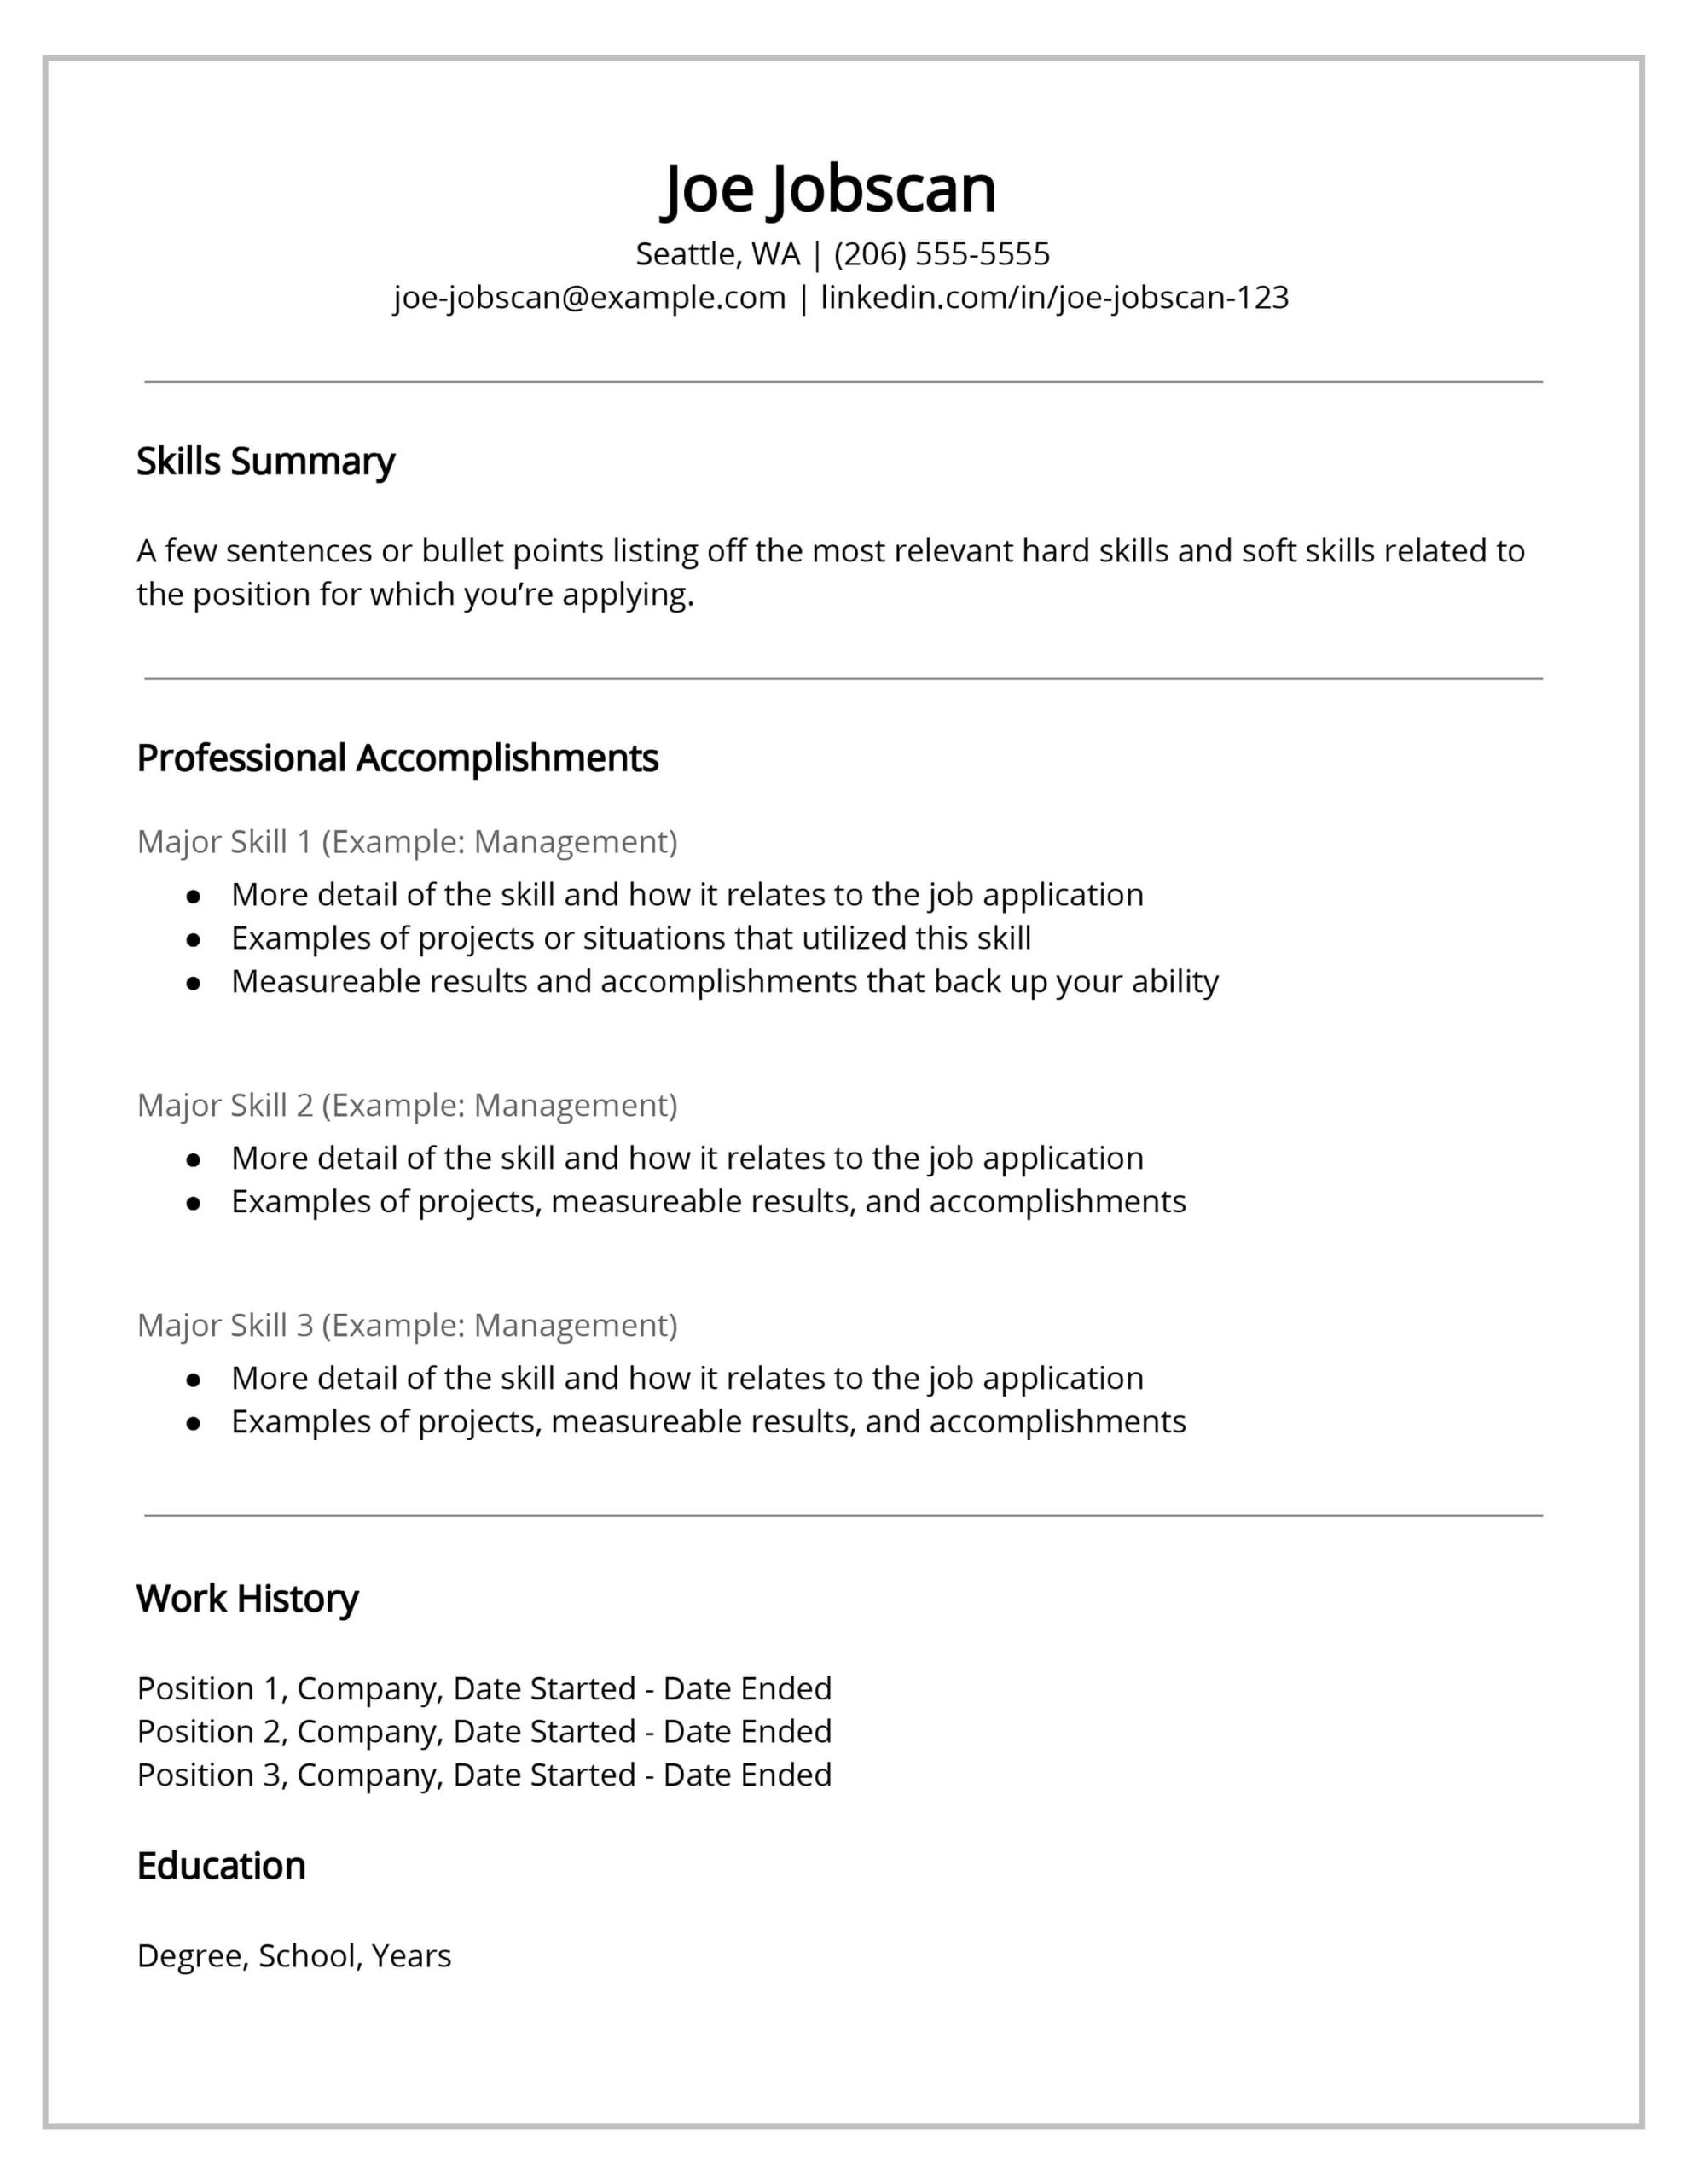 Sample Skills and Abilities for A Resume Recruiters Hate the Functional Resume formatâdo This Instead